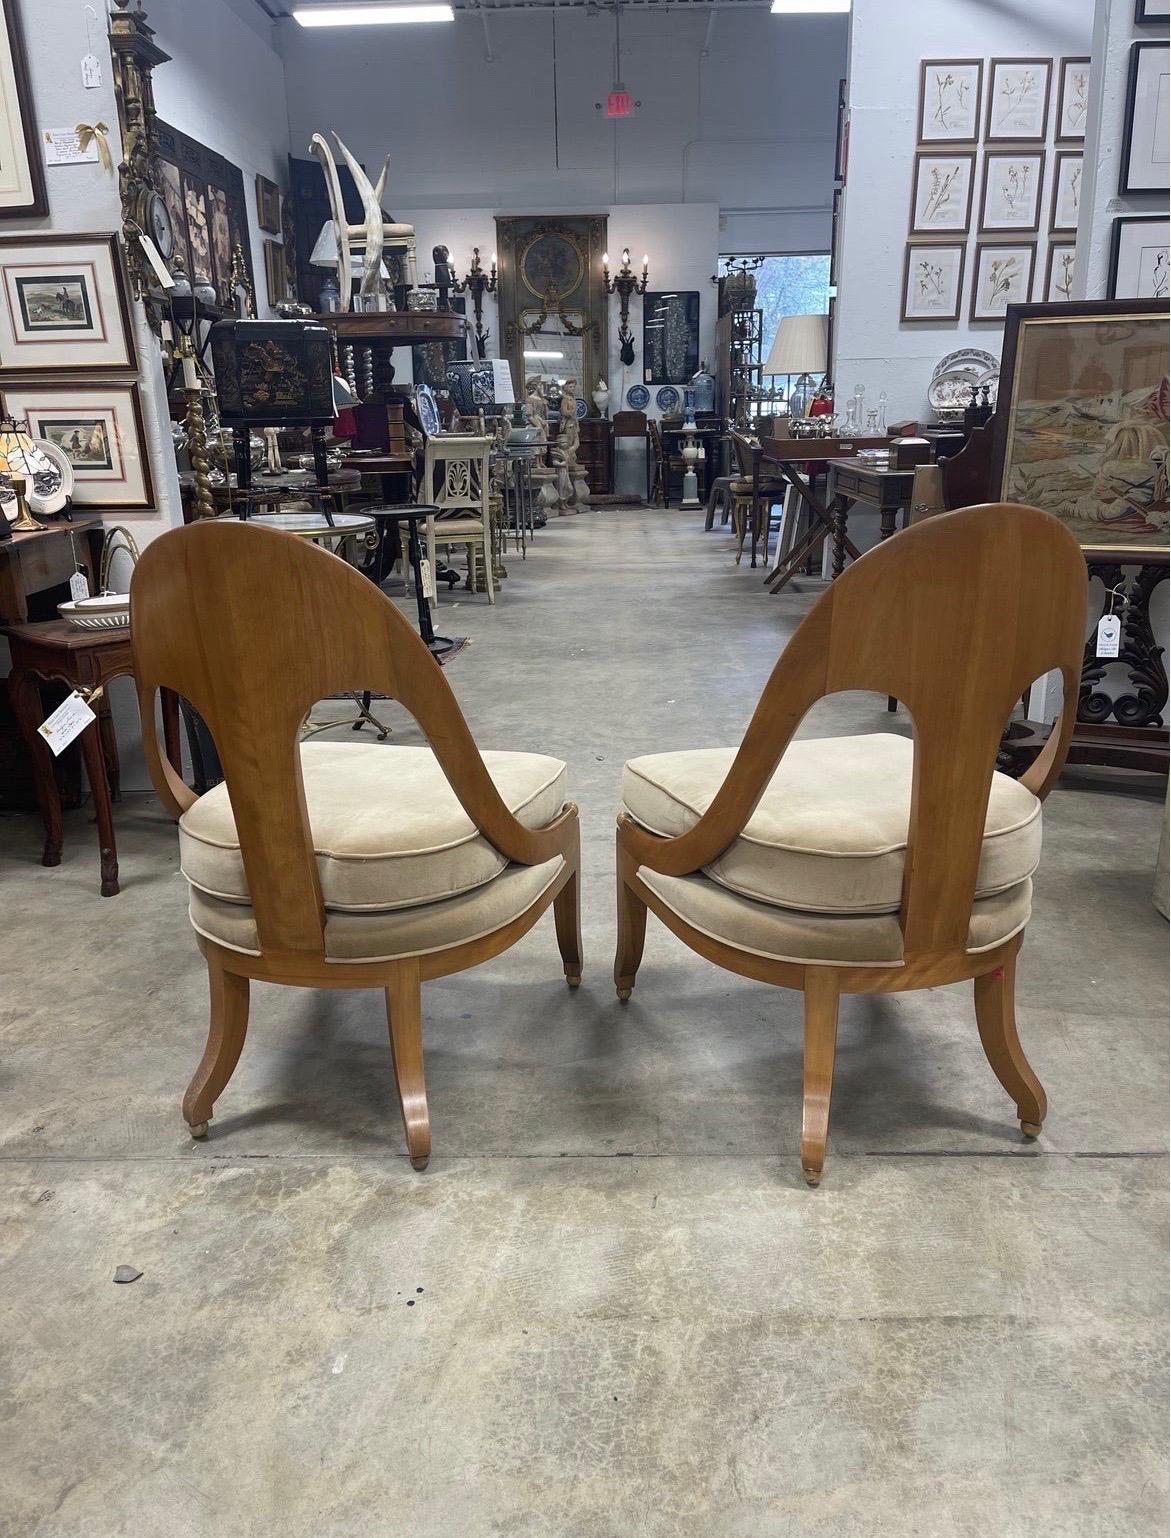 A pair of American (Likely Baker) mid century walnut framed spoon back chairs. After the 19th century Italian chairs - these are exceptional form and condition.